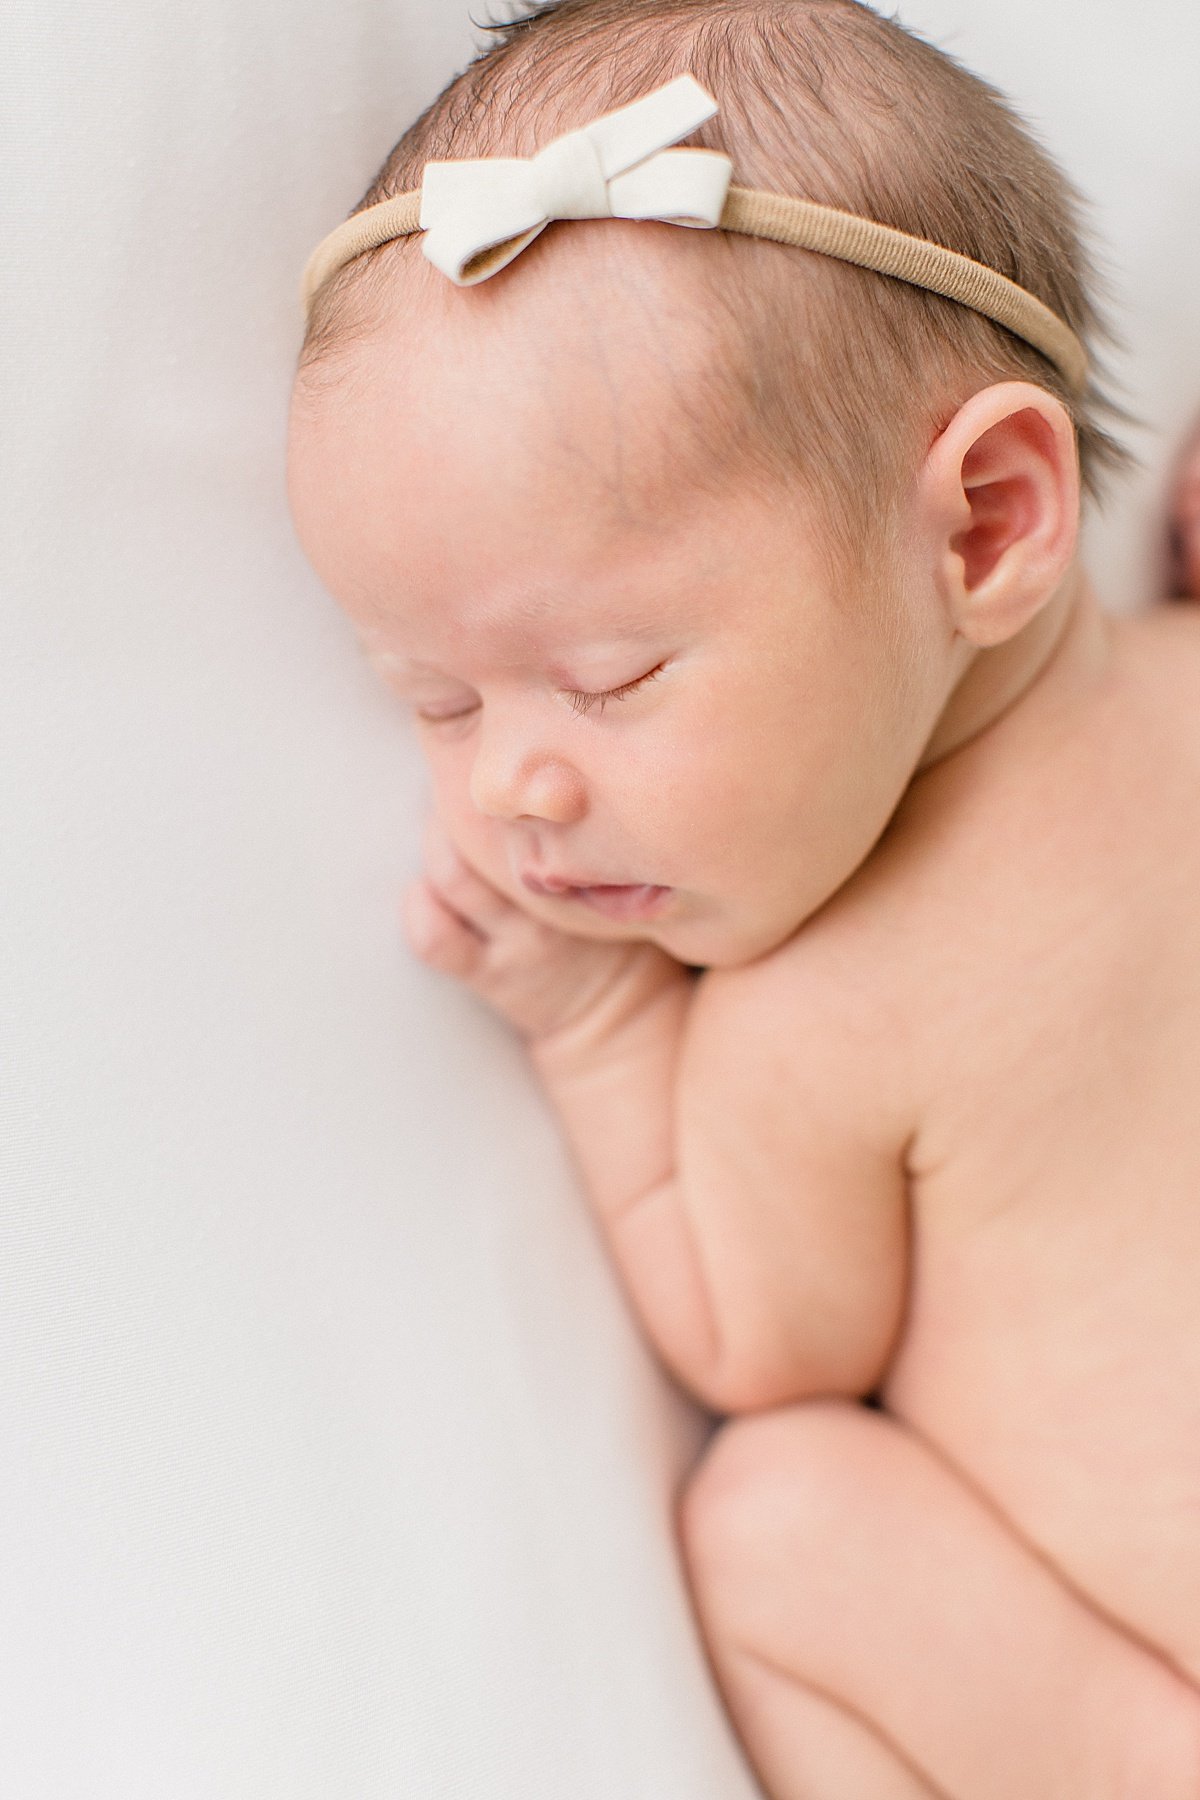 Sleepy Newborn Photography session with Ambre Williams Photography | Newport Beach, CA Photographer